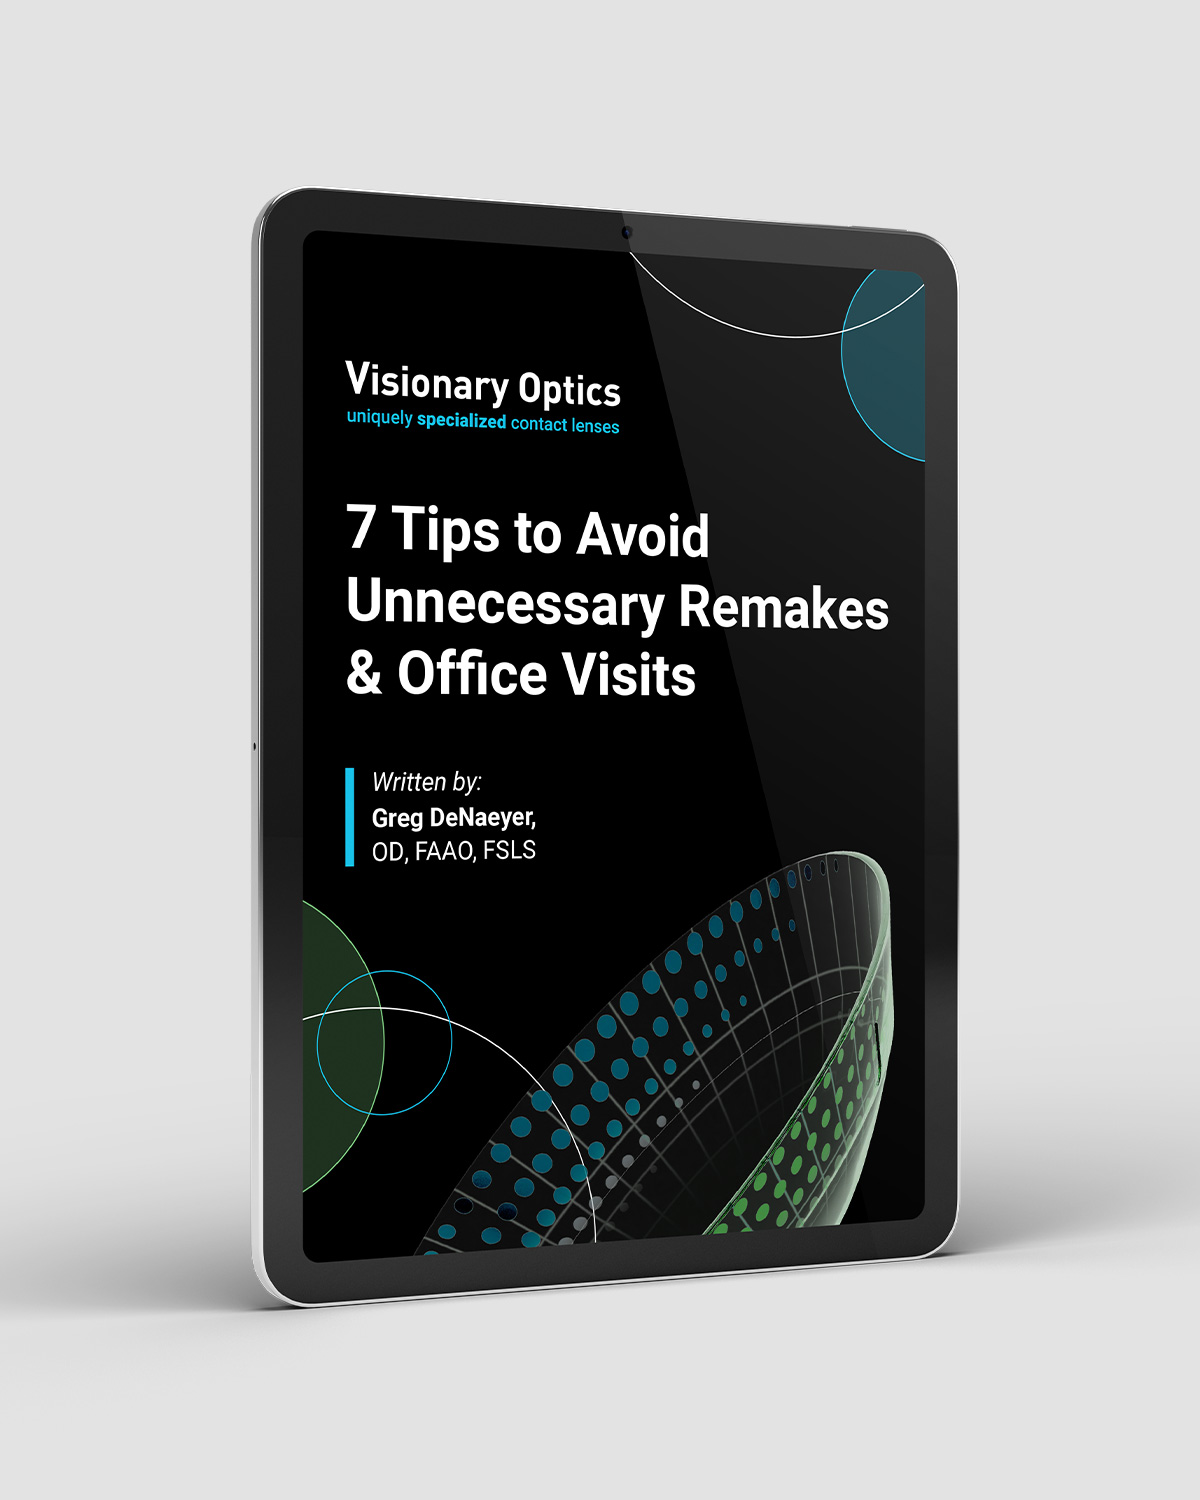 7 Tips to Avoid Unnecessary Remakes and Office Visits Guide